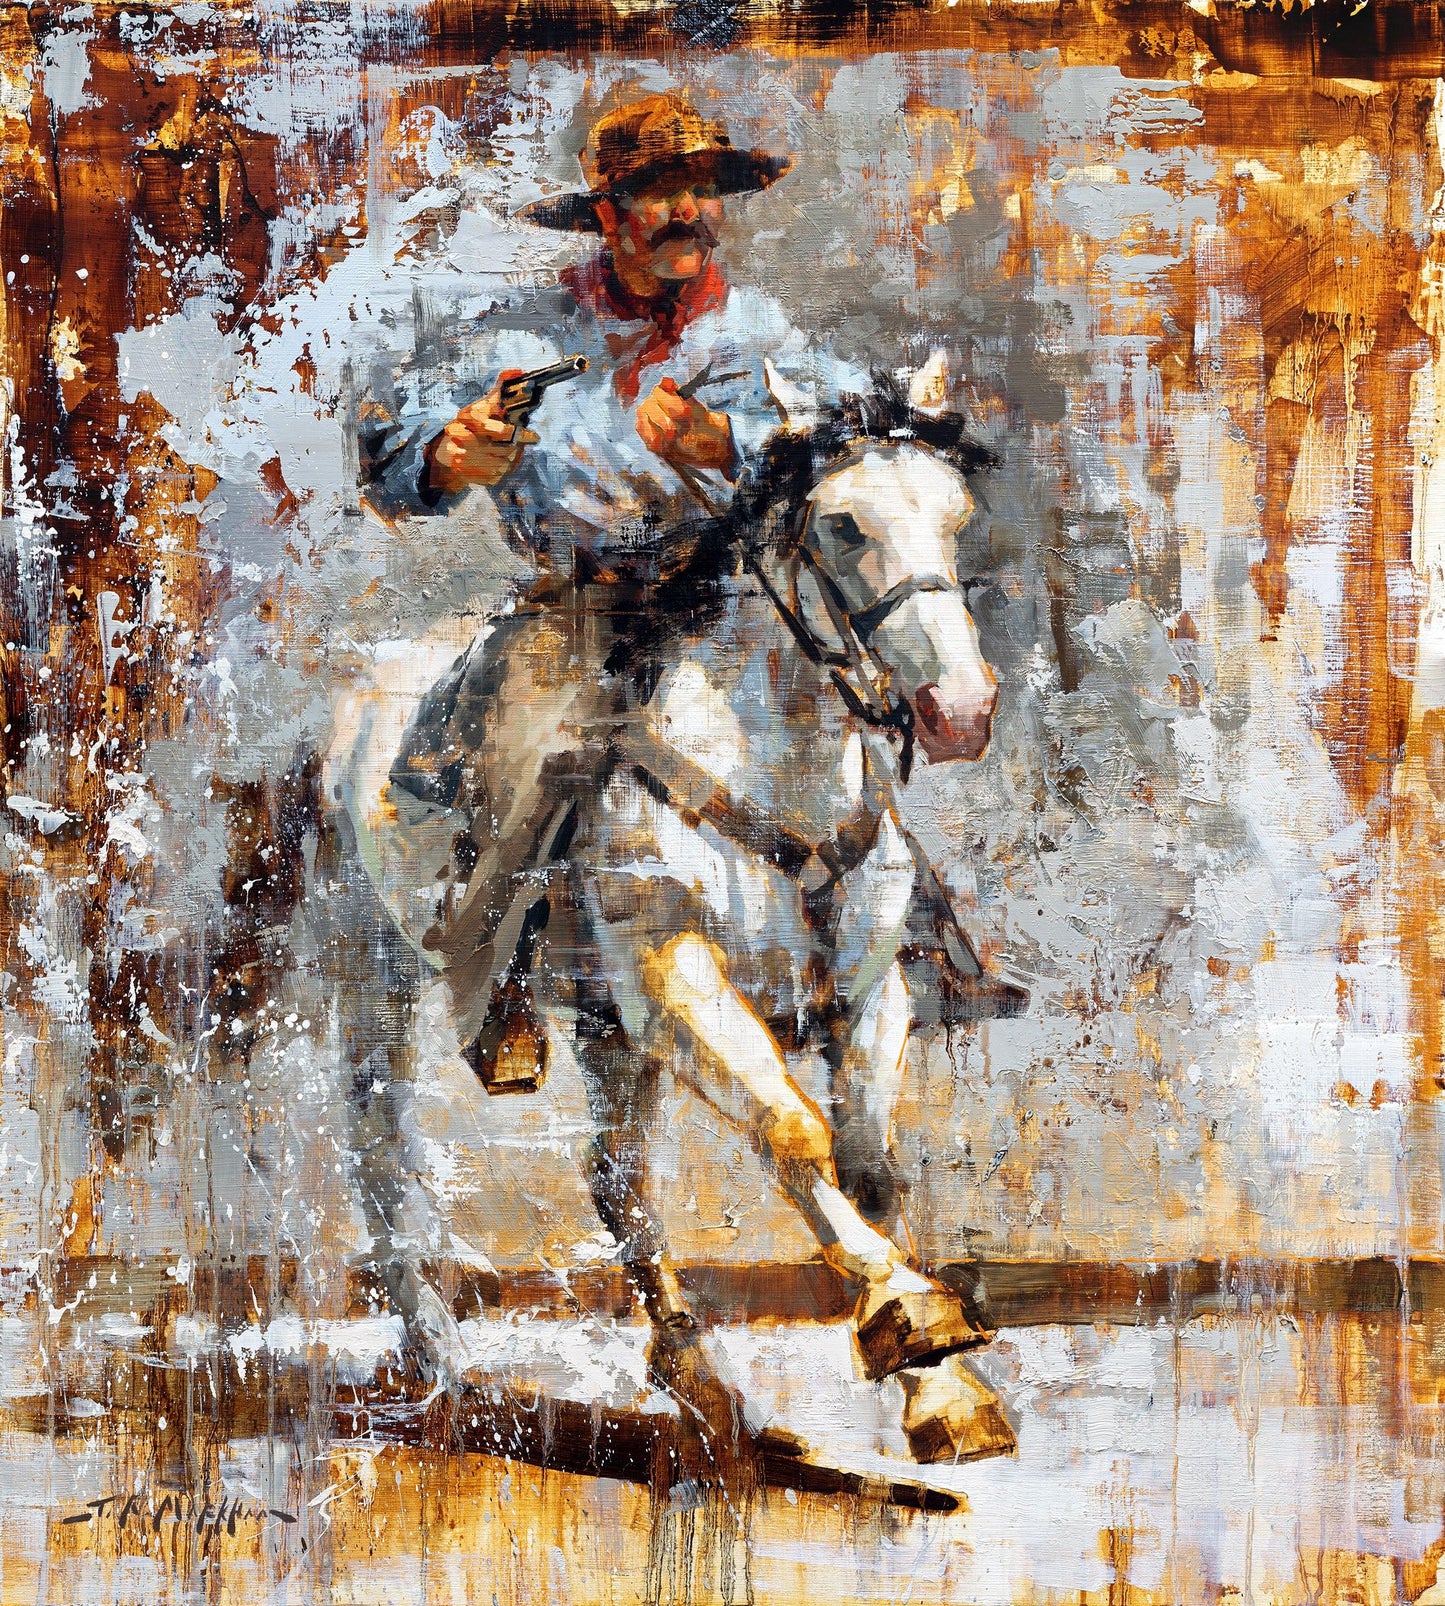 In Hot Pursuit-Painting-Jerry Markham-Sorrel Sky Gallery